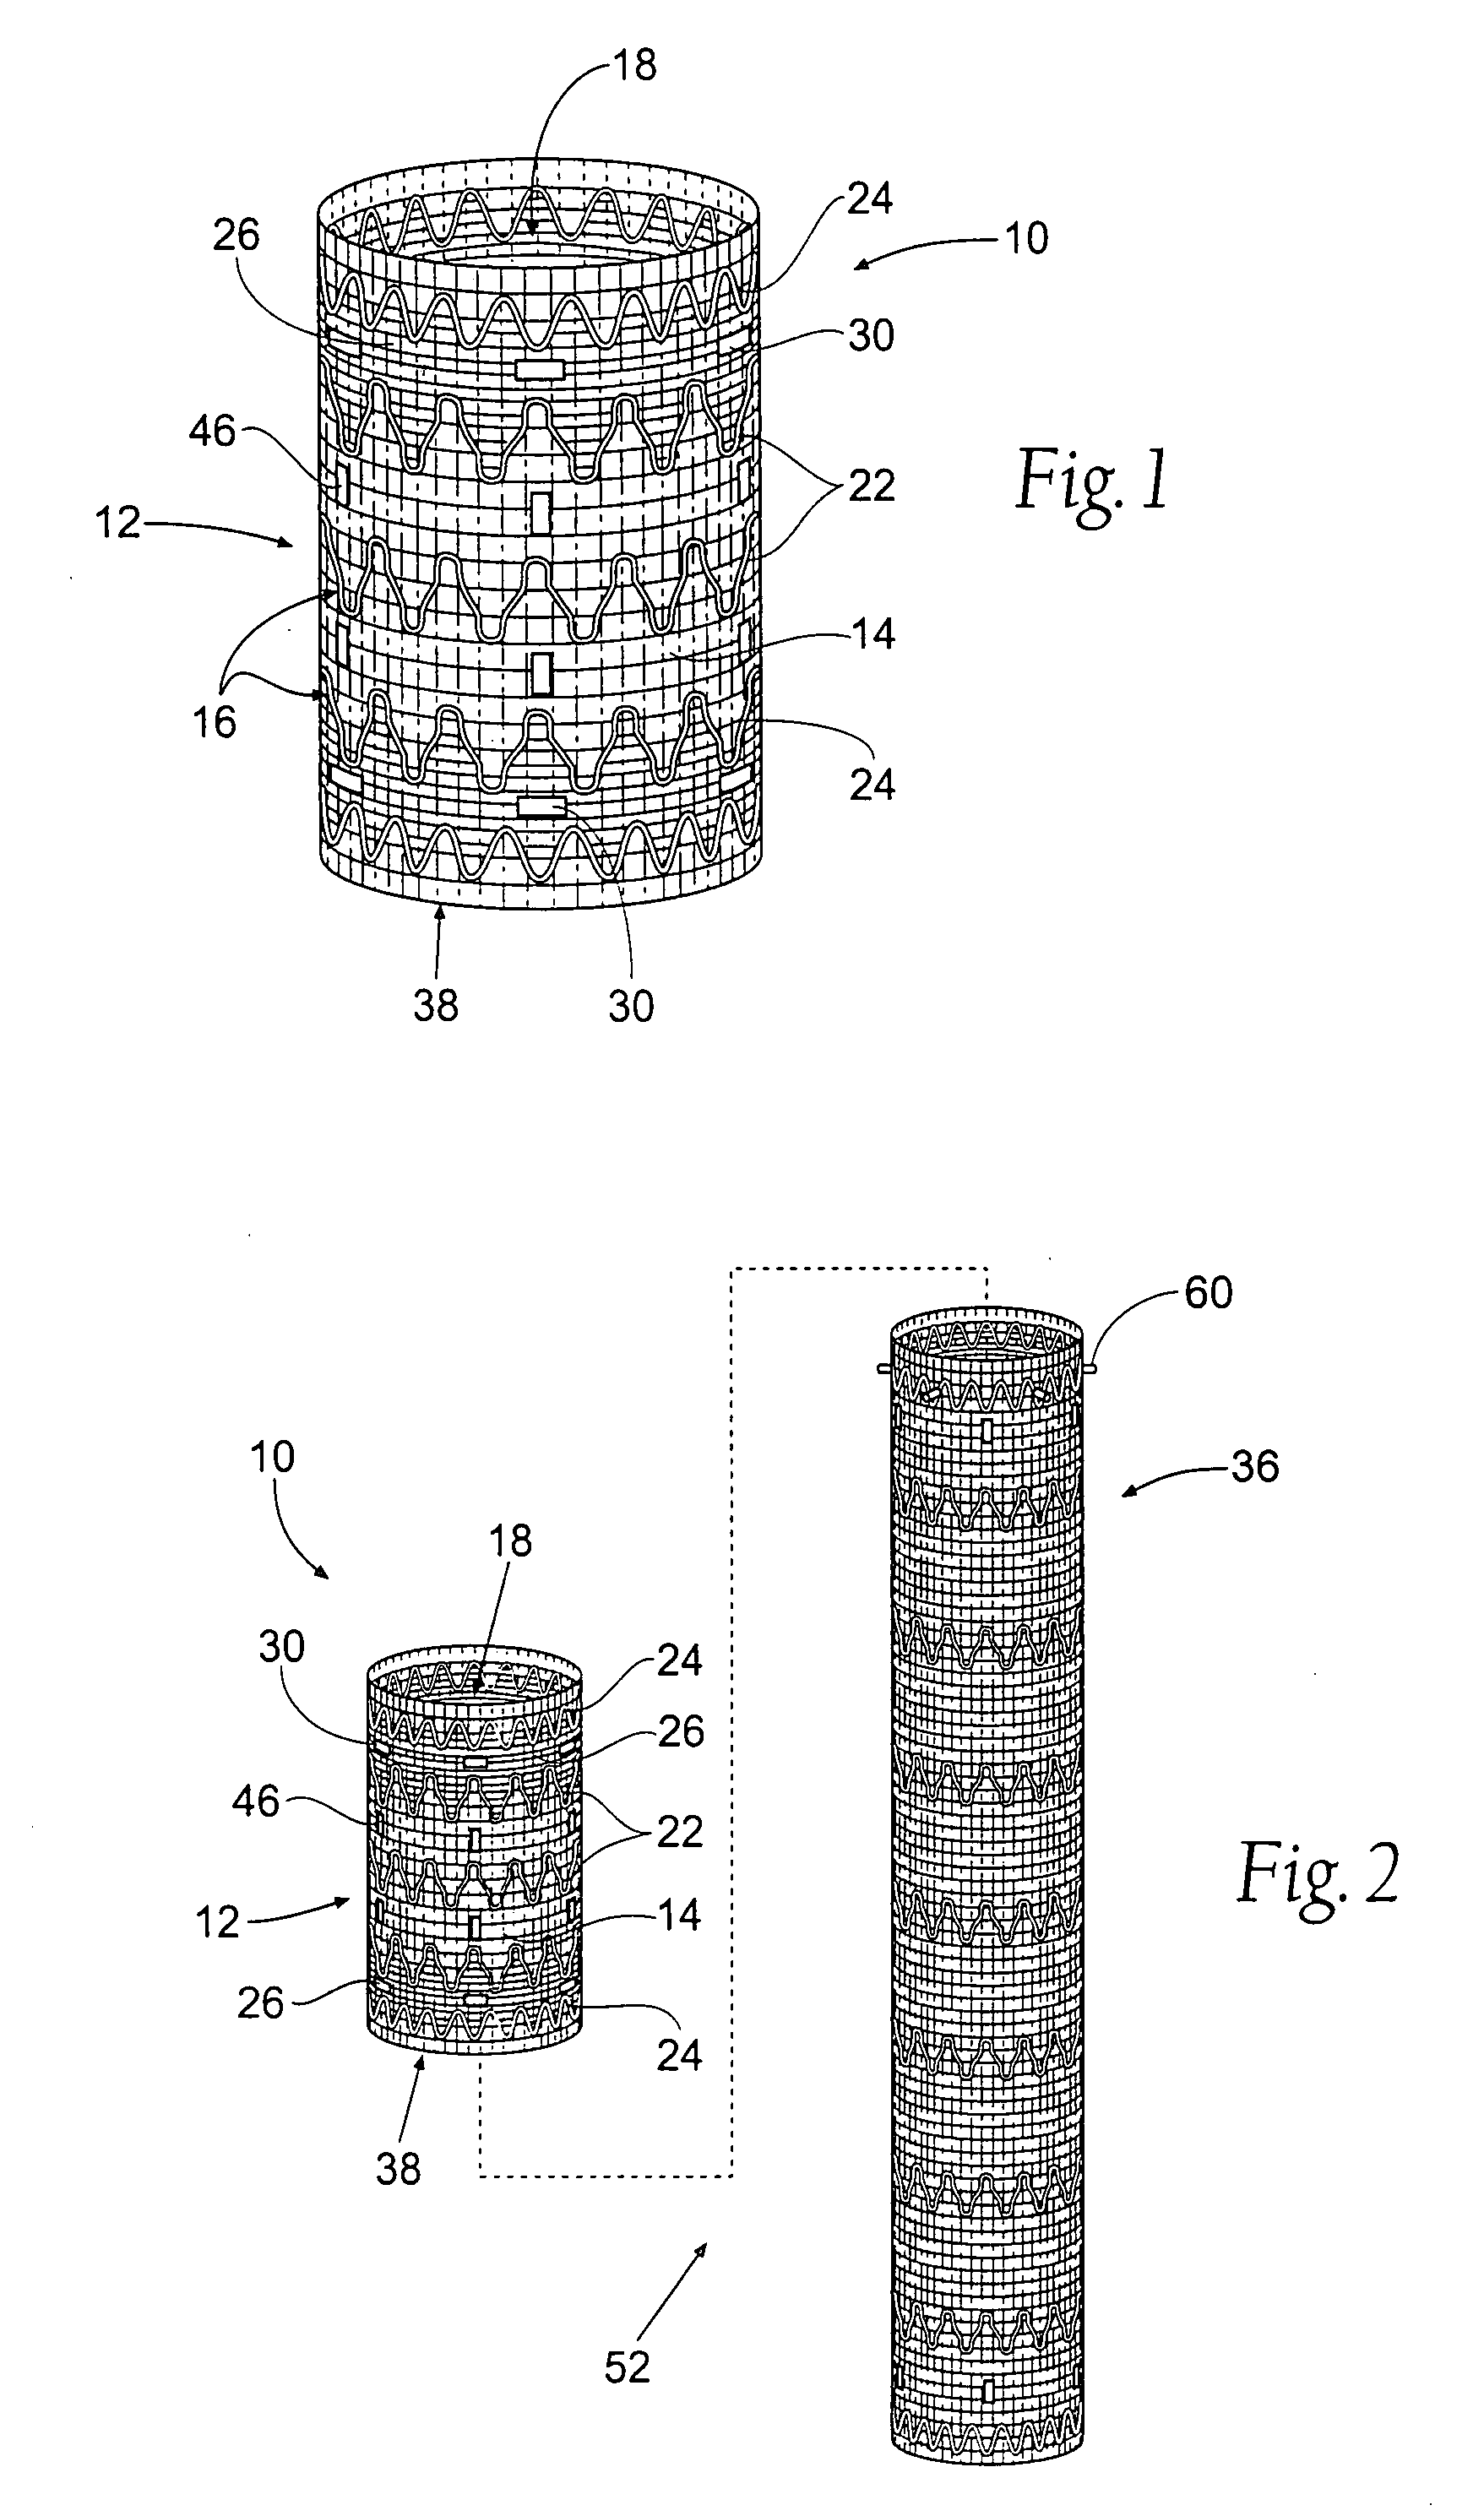 Prosthesis systems and methods